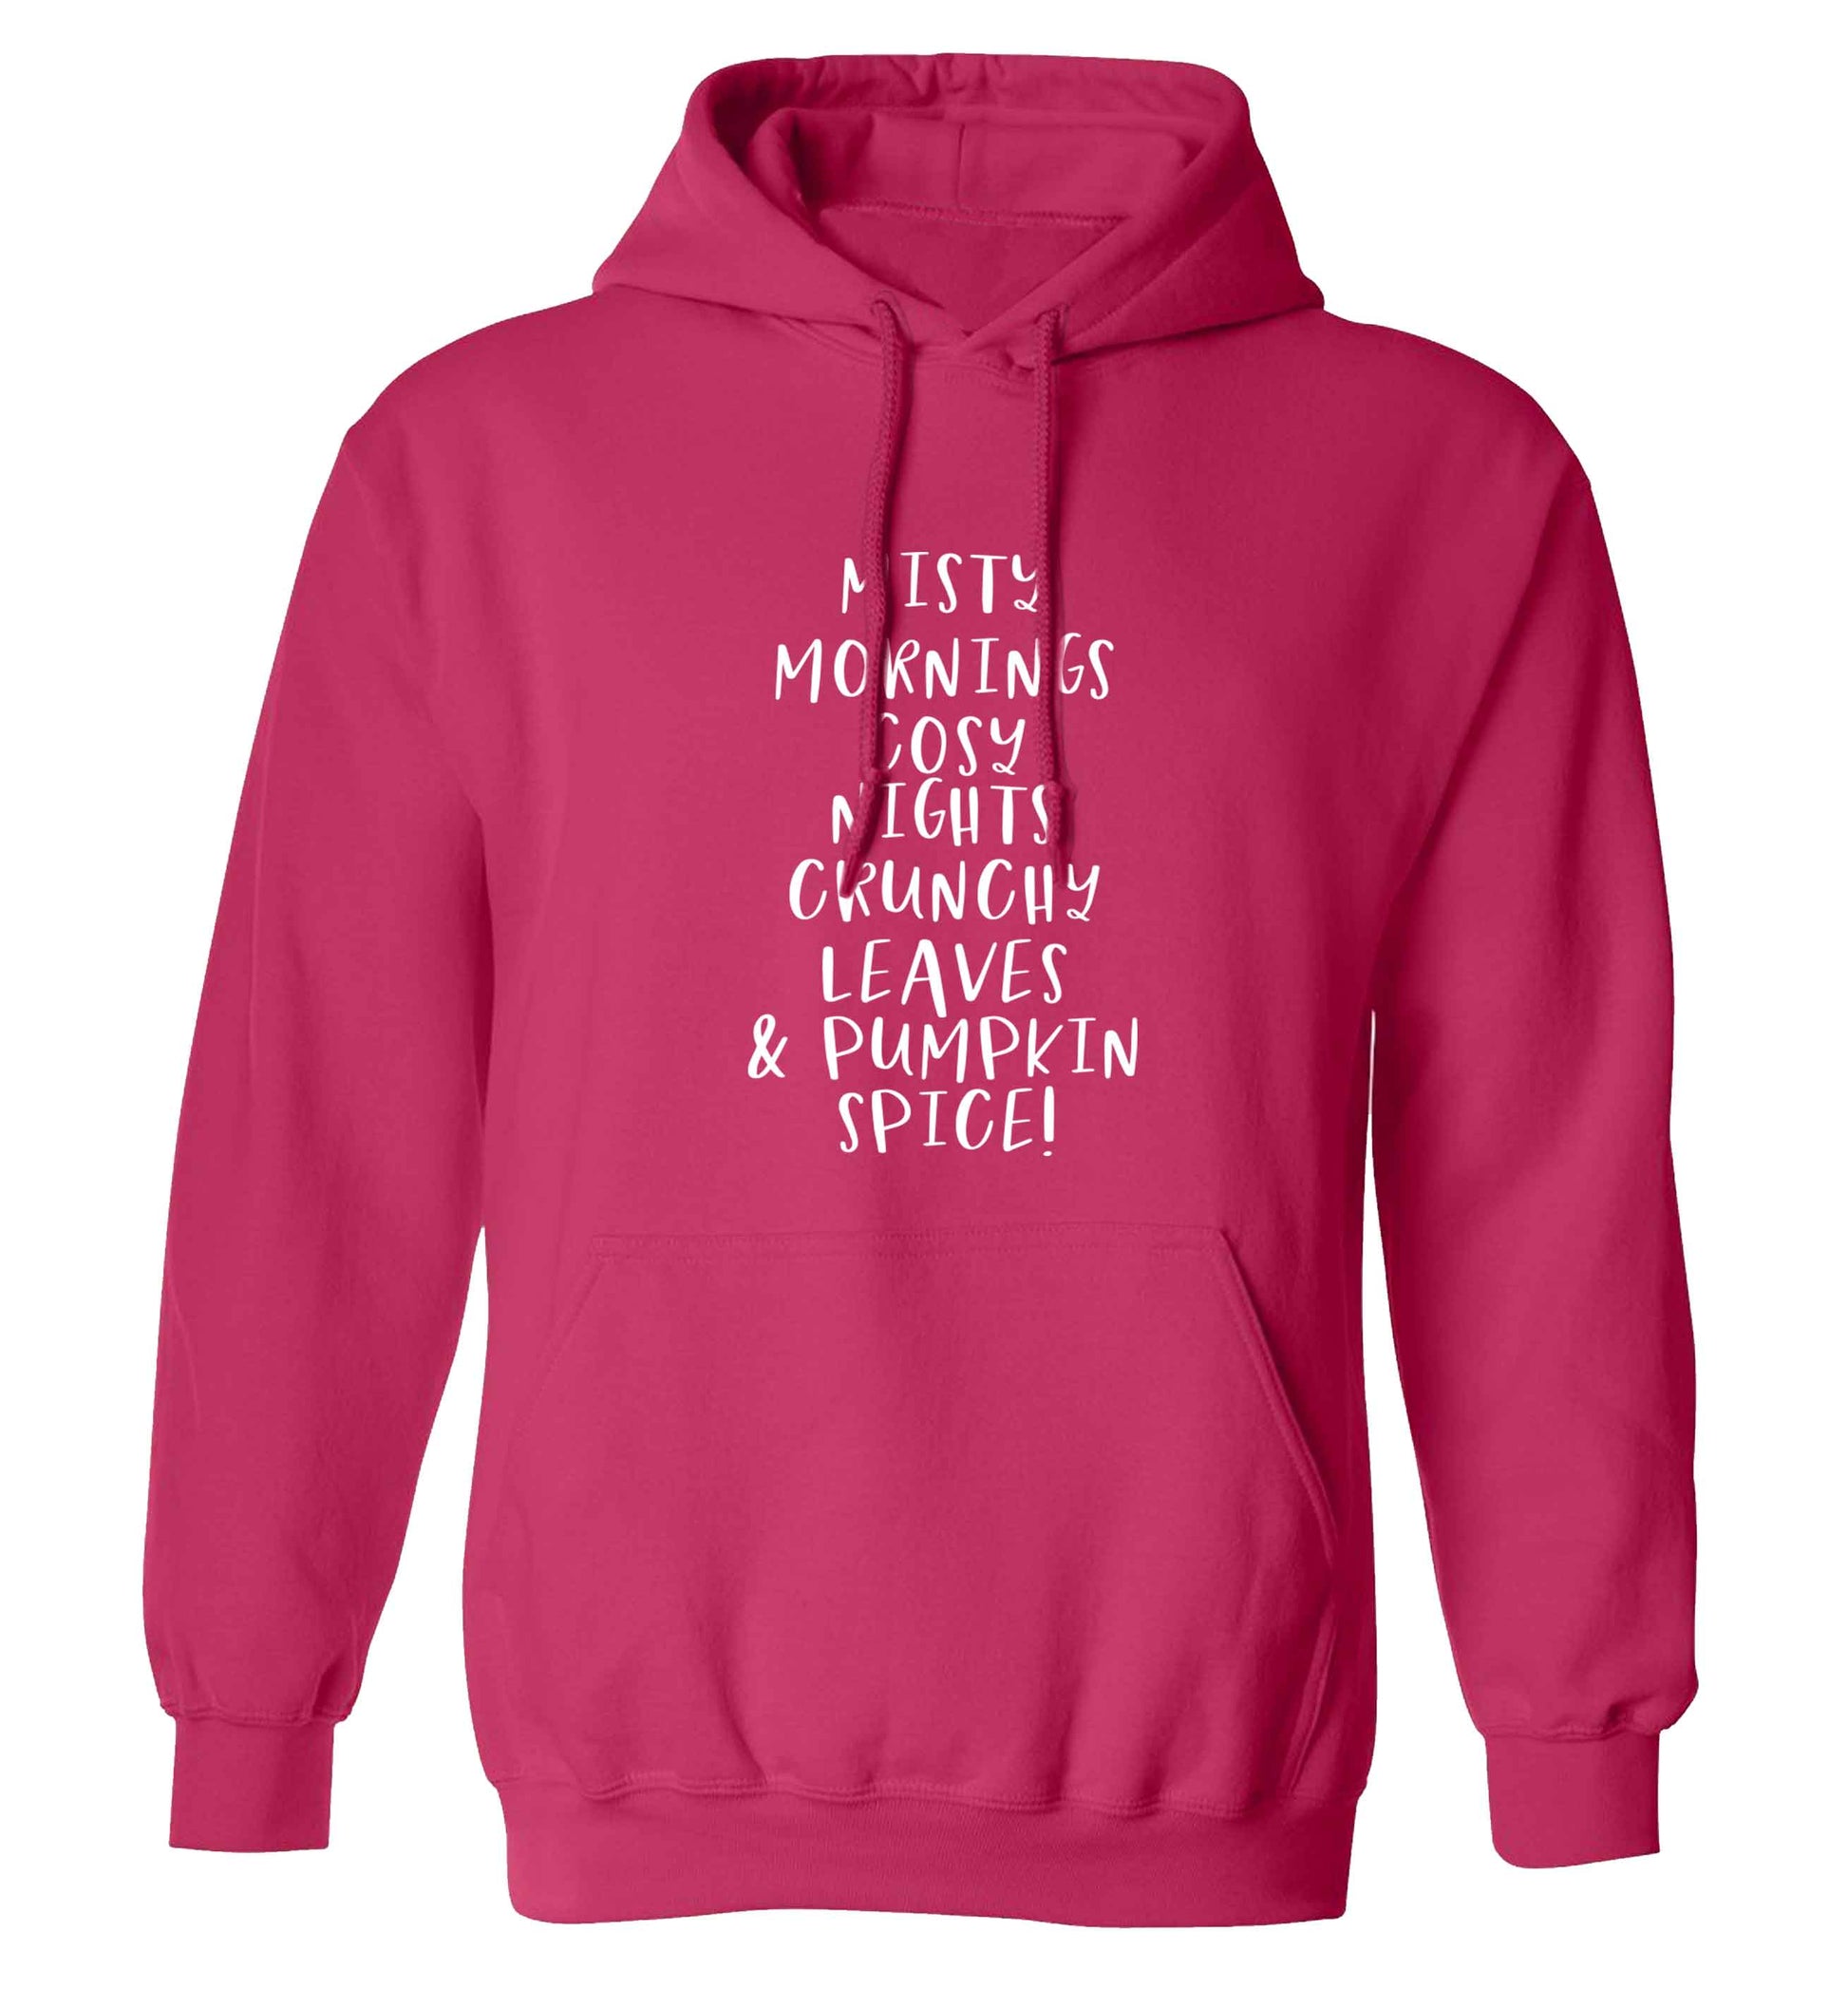 Misty Mornings adults unisex pink hoodie 2XL